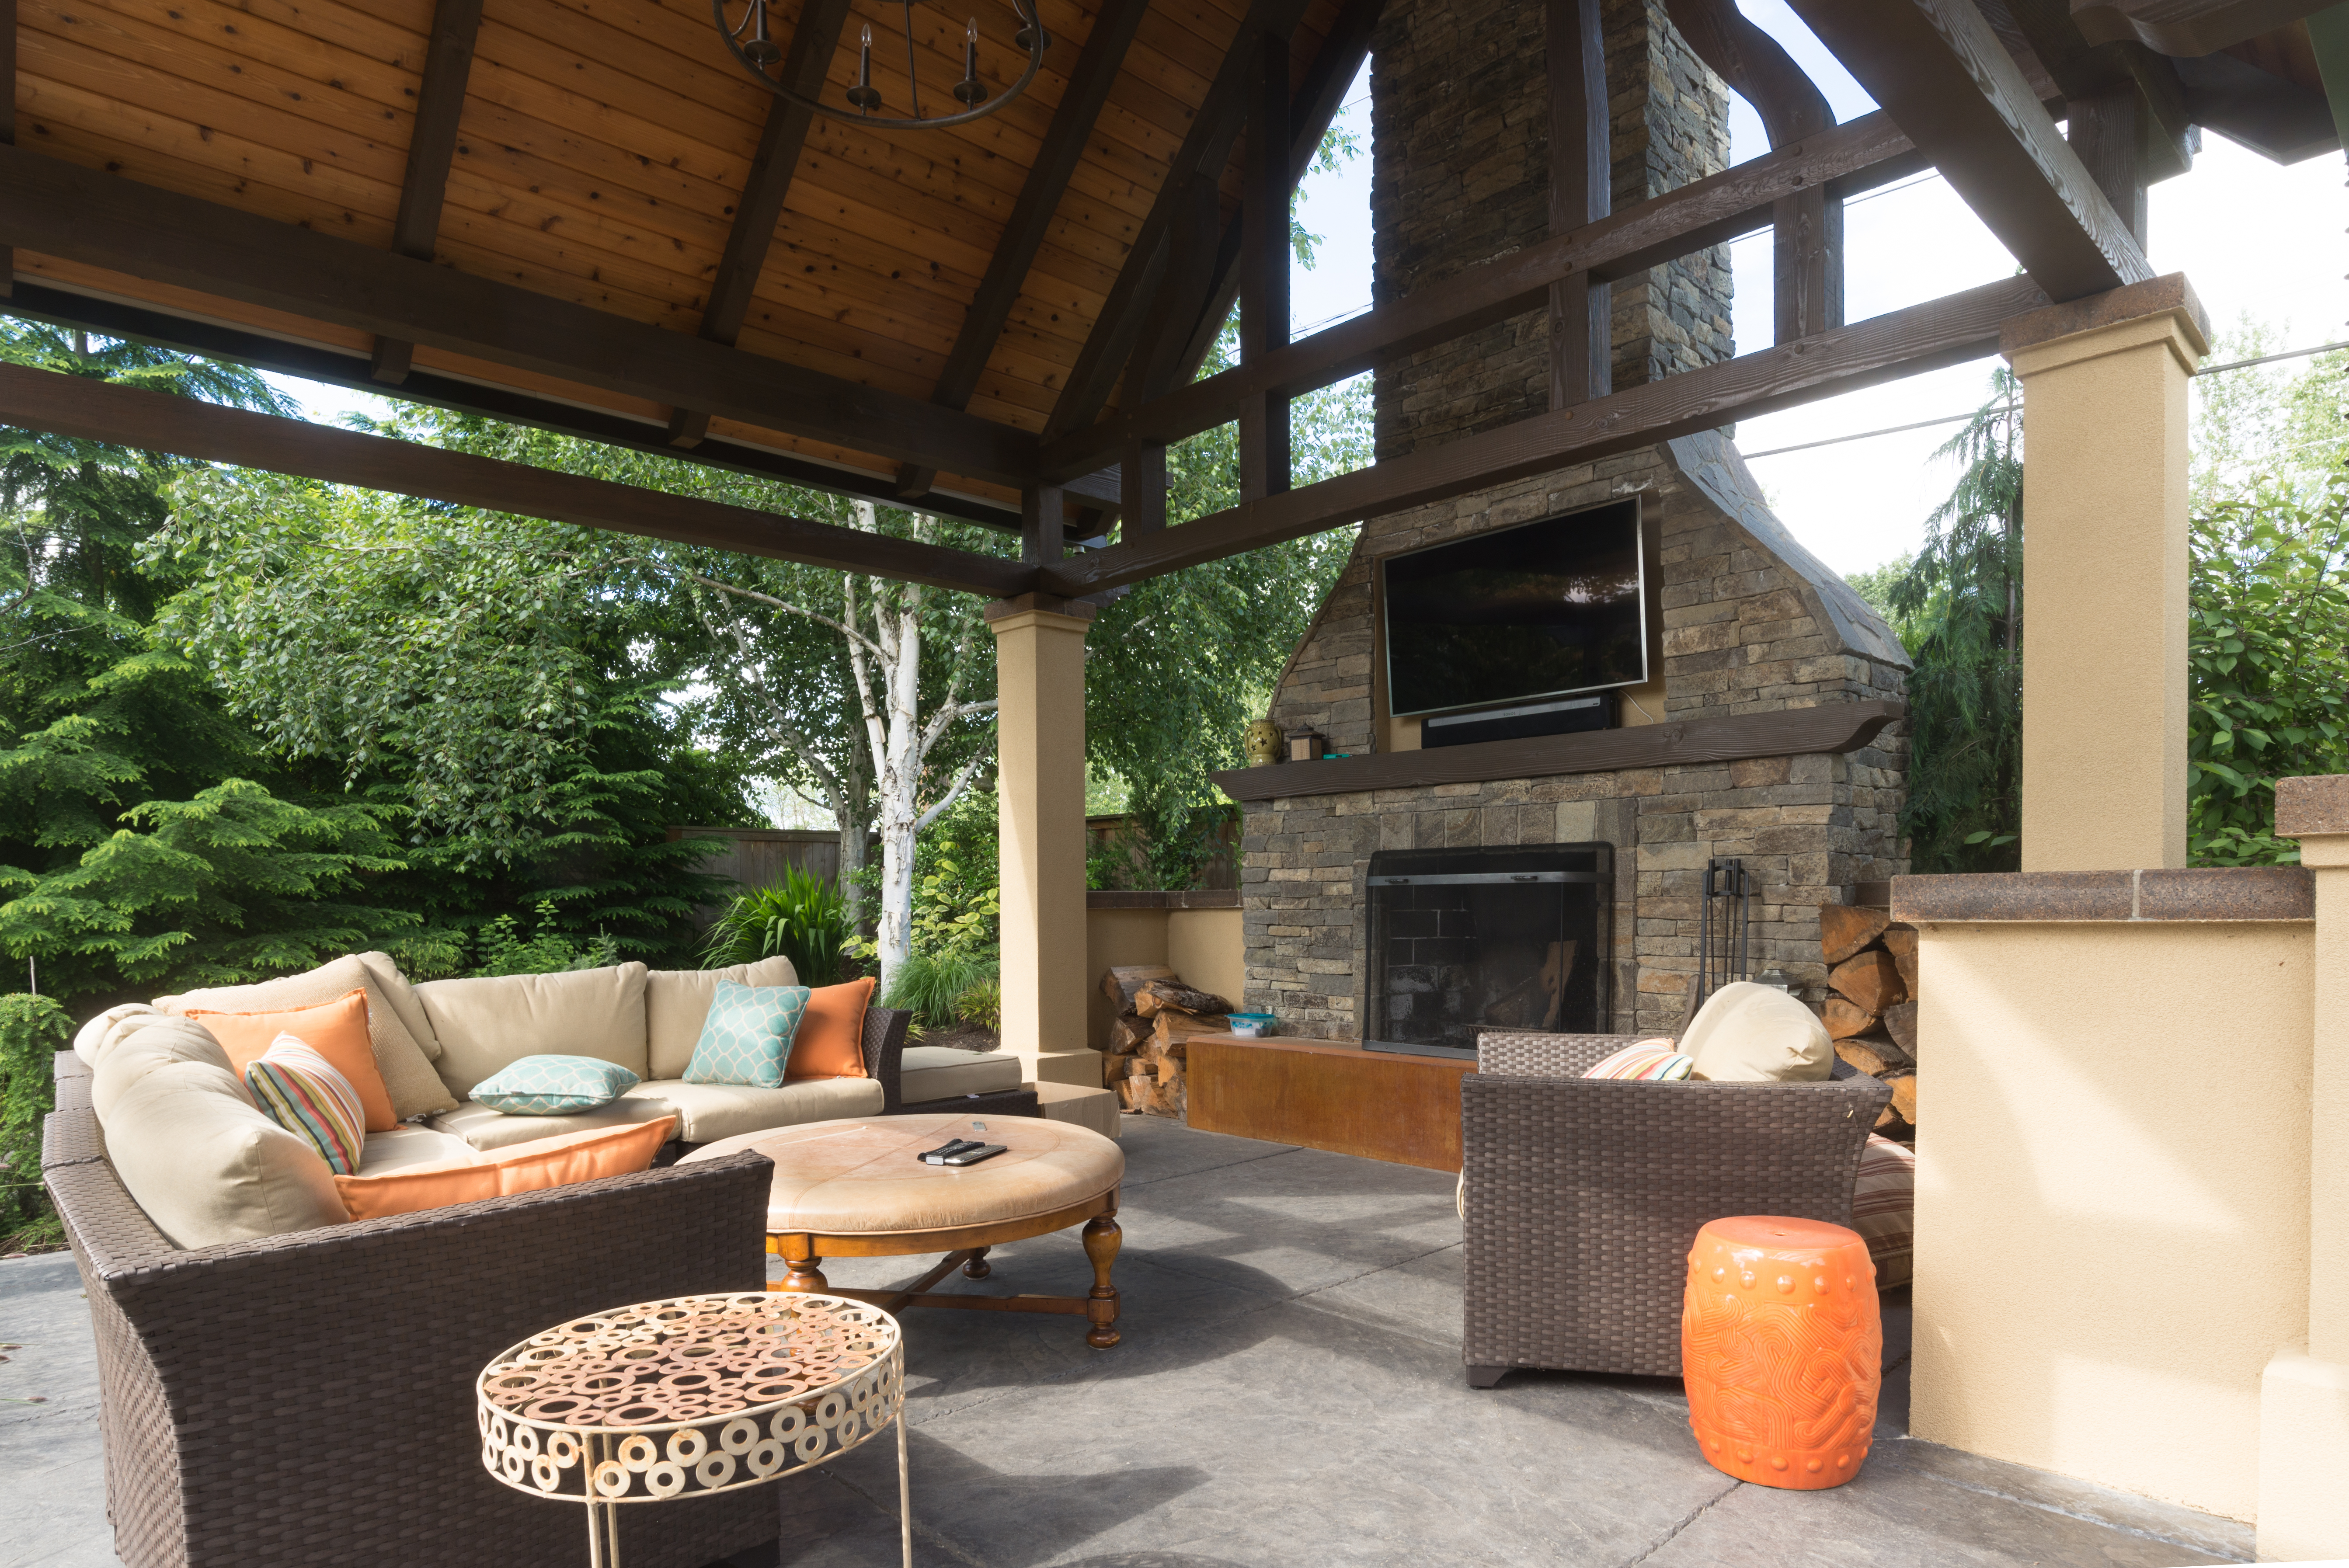 upscale outdoor terrace/room with comfortable furniture and big fireplace